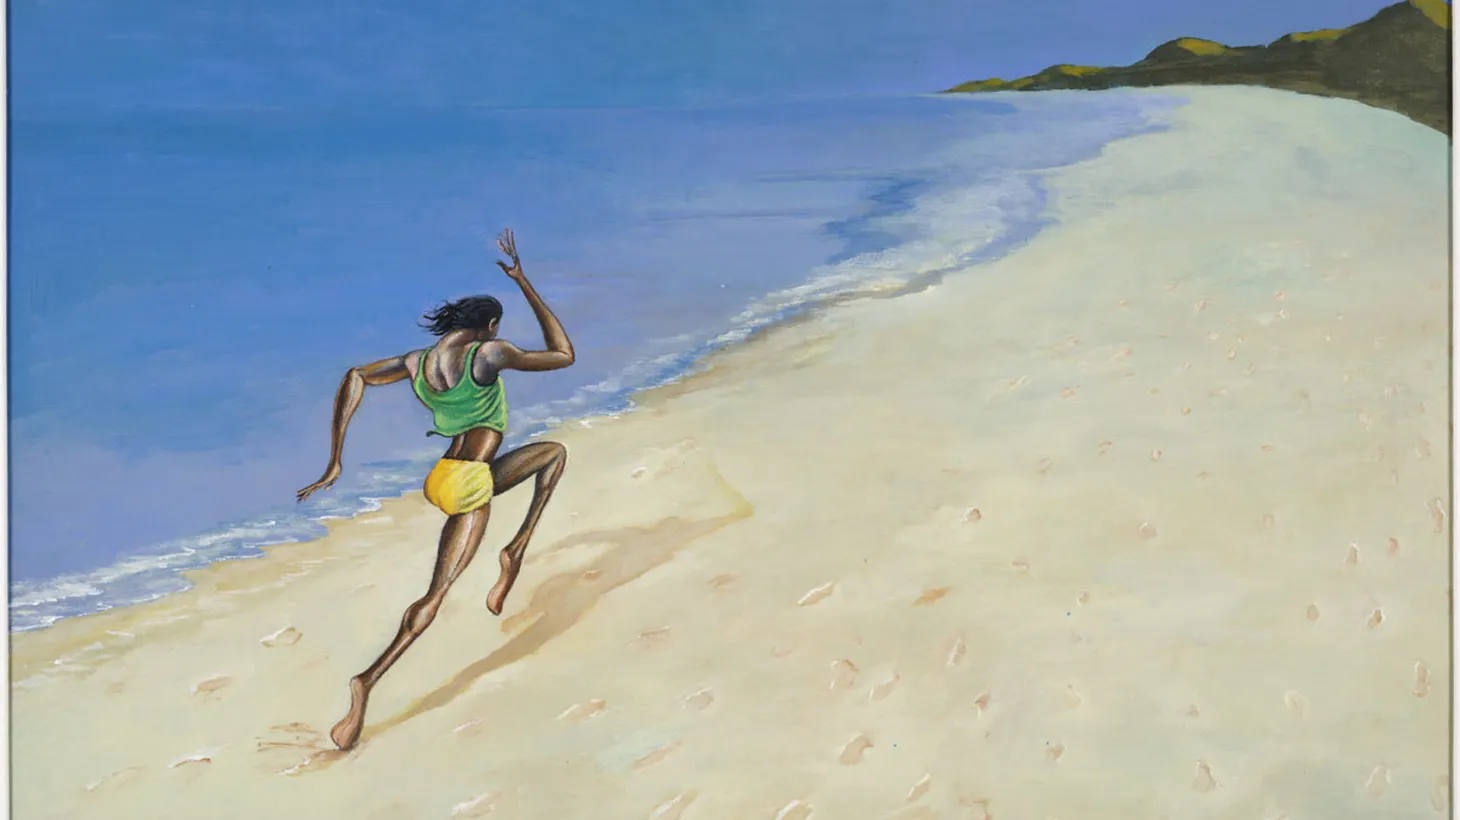 “The Beach Runner” by Ernie Barnes is on display now at SoFi Stadium.